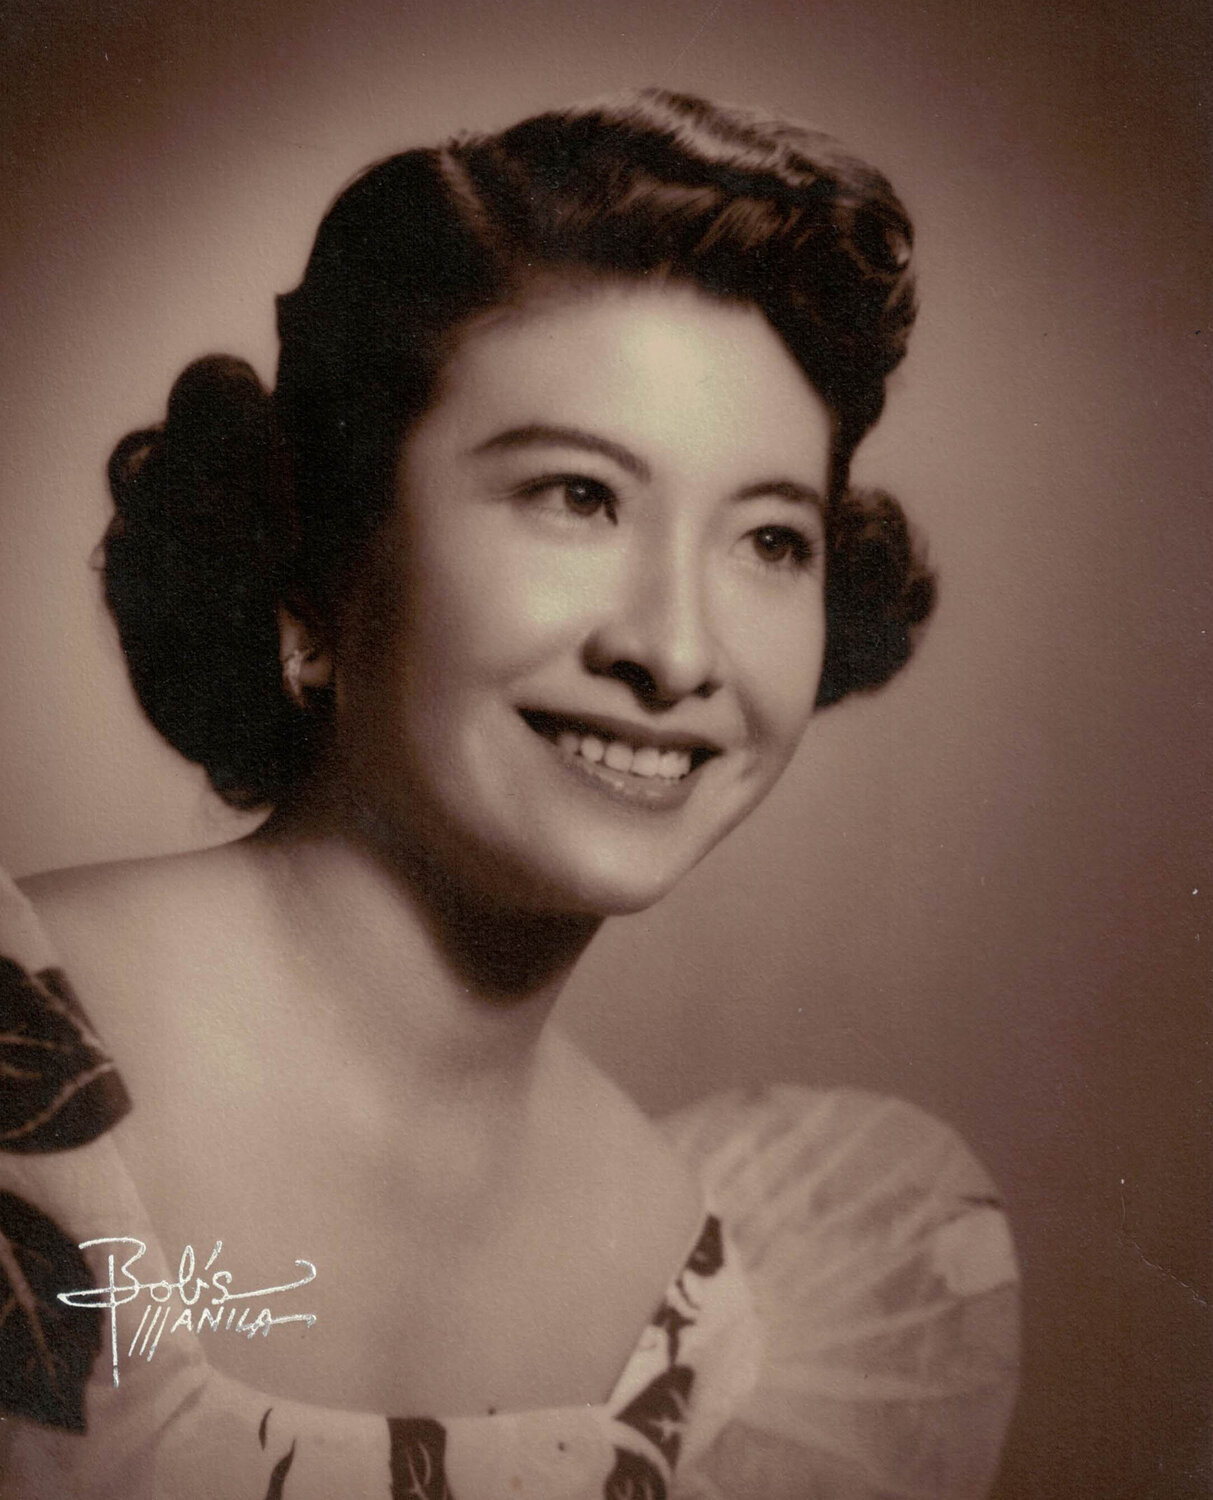 Lourdes "Lulu" Reyes Besa - humanitarian aid worker, Filipina civilian recipient of the US Medal of Freedom from President Harry Truman (twice in 1947).